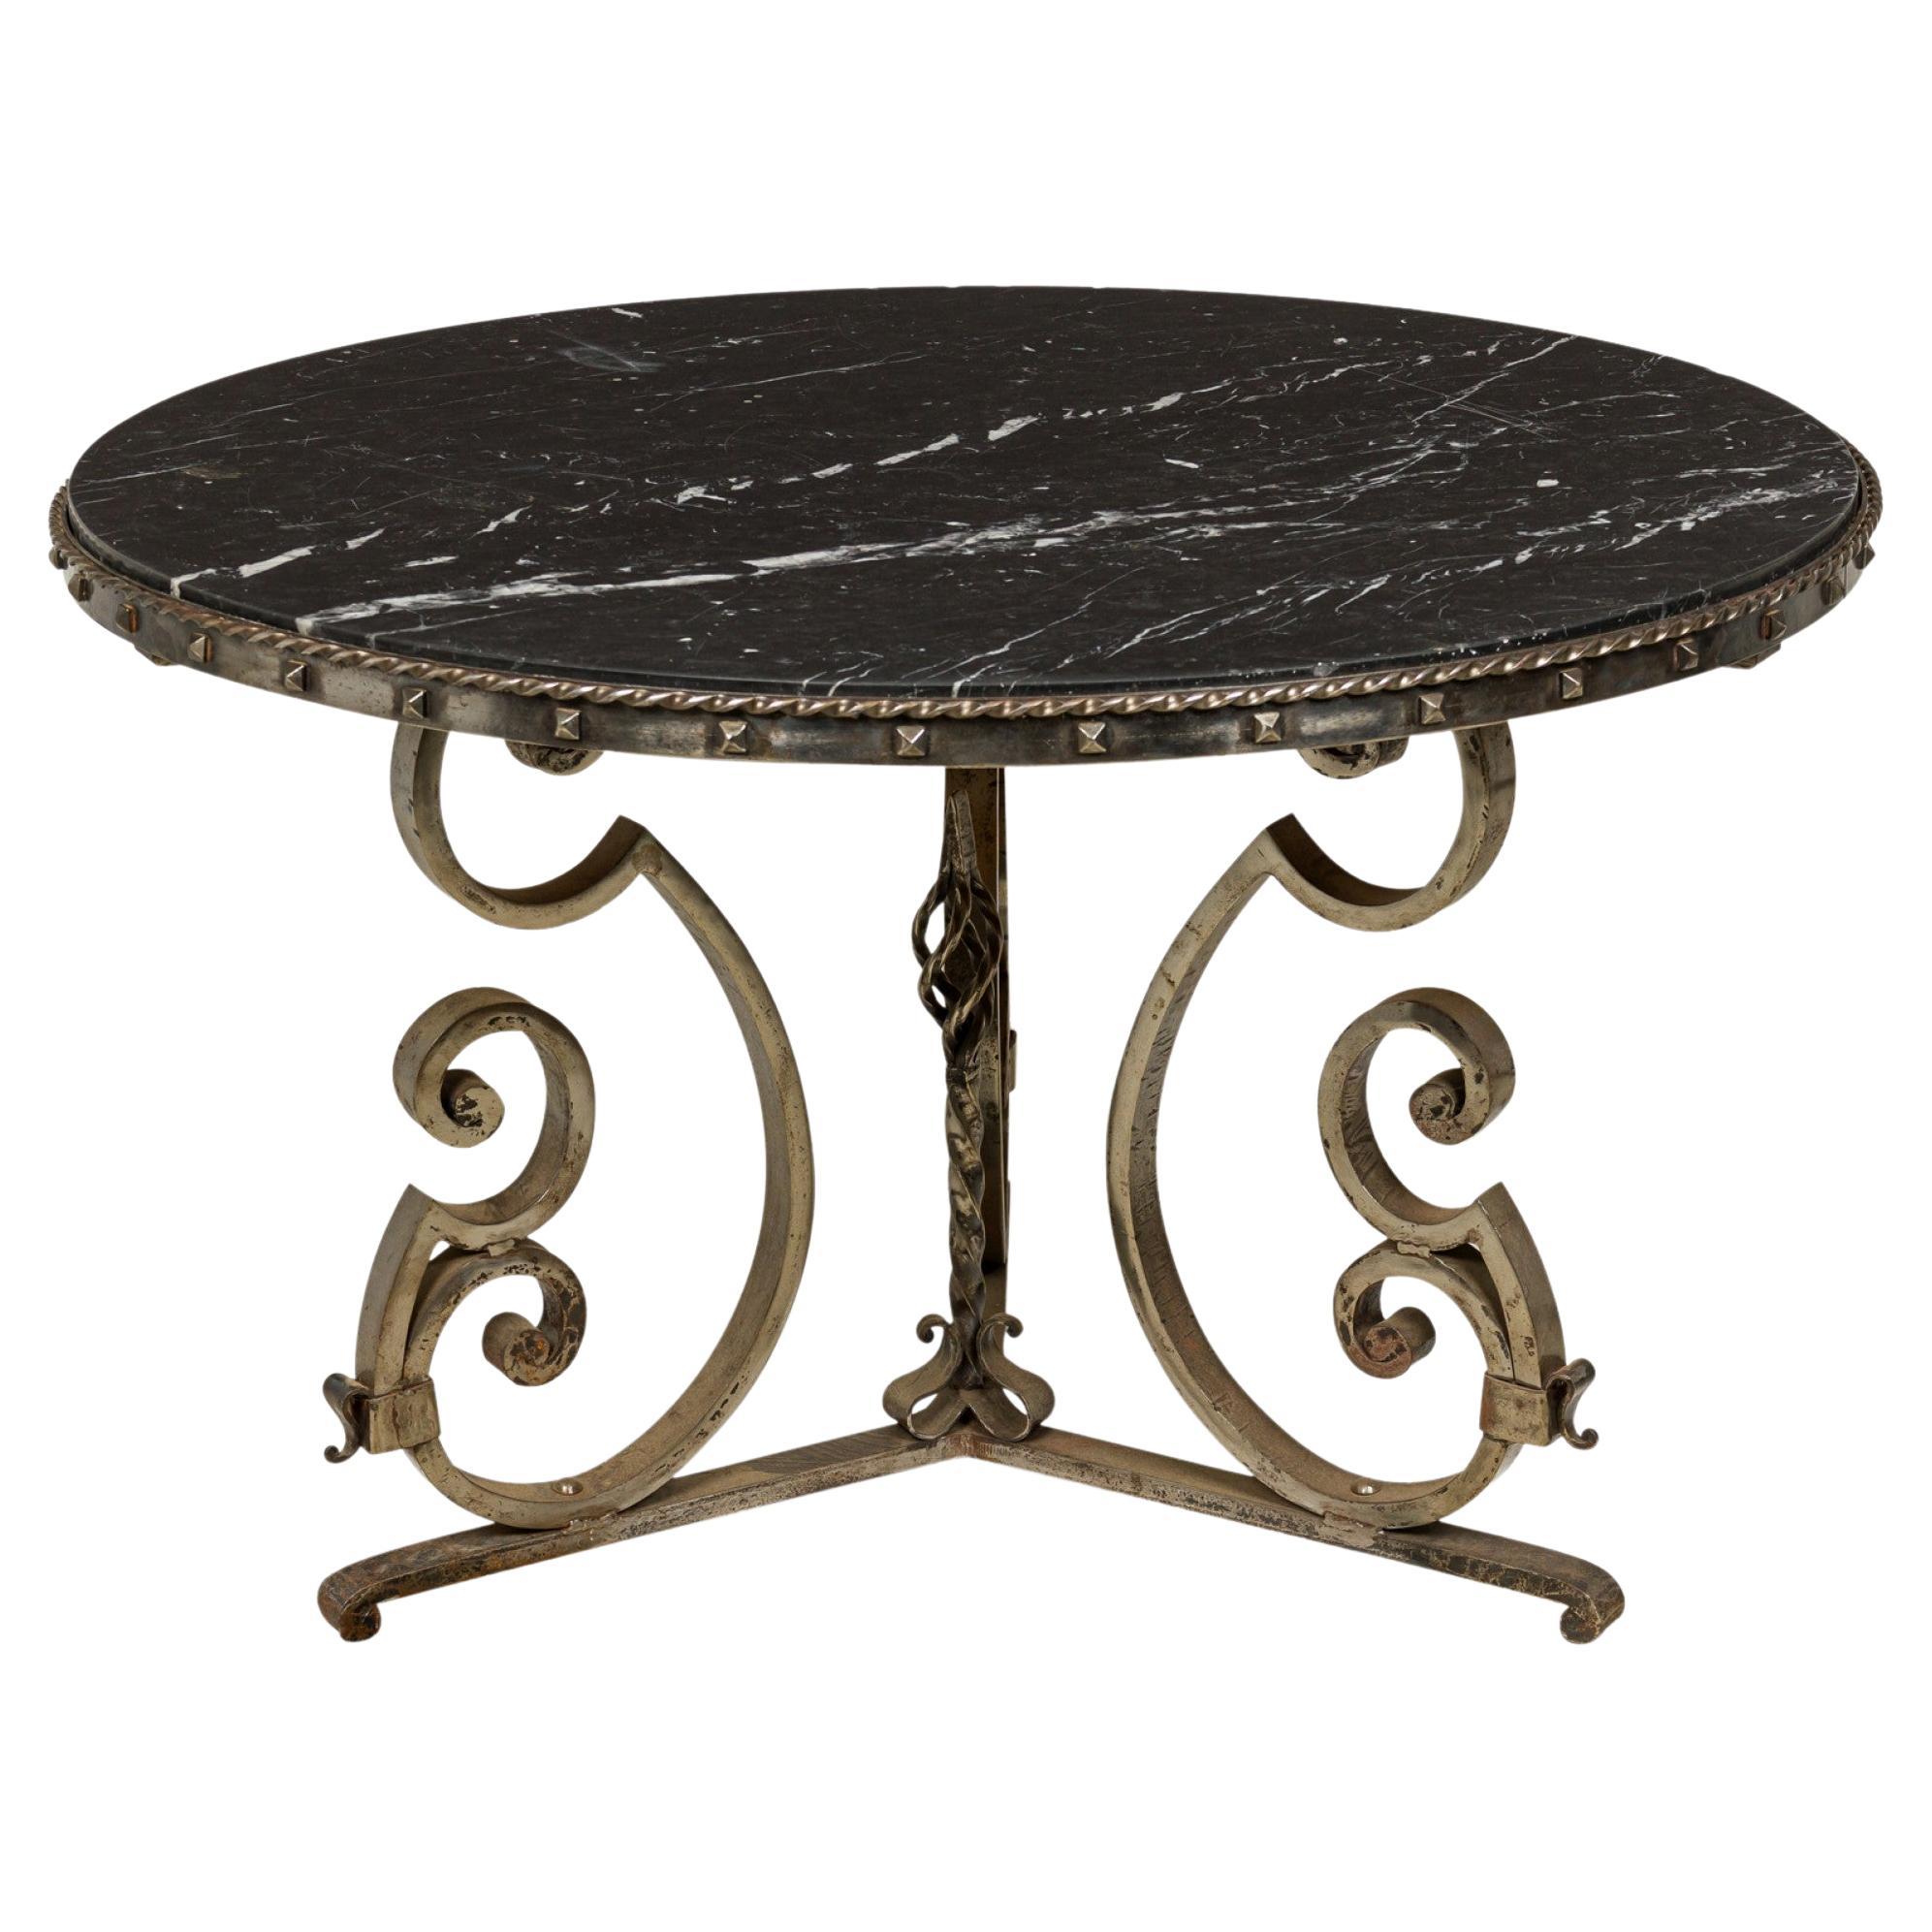 French Art Deco Iron and Black Marble Circular Scoll Form Center Table